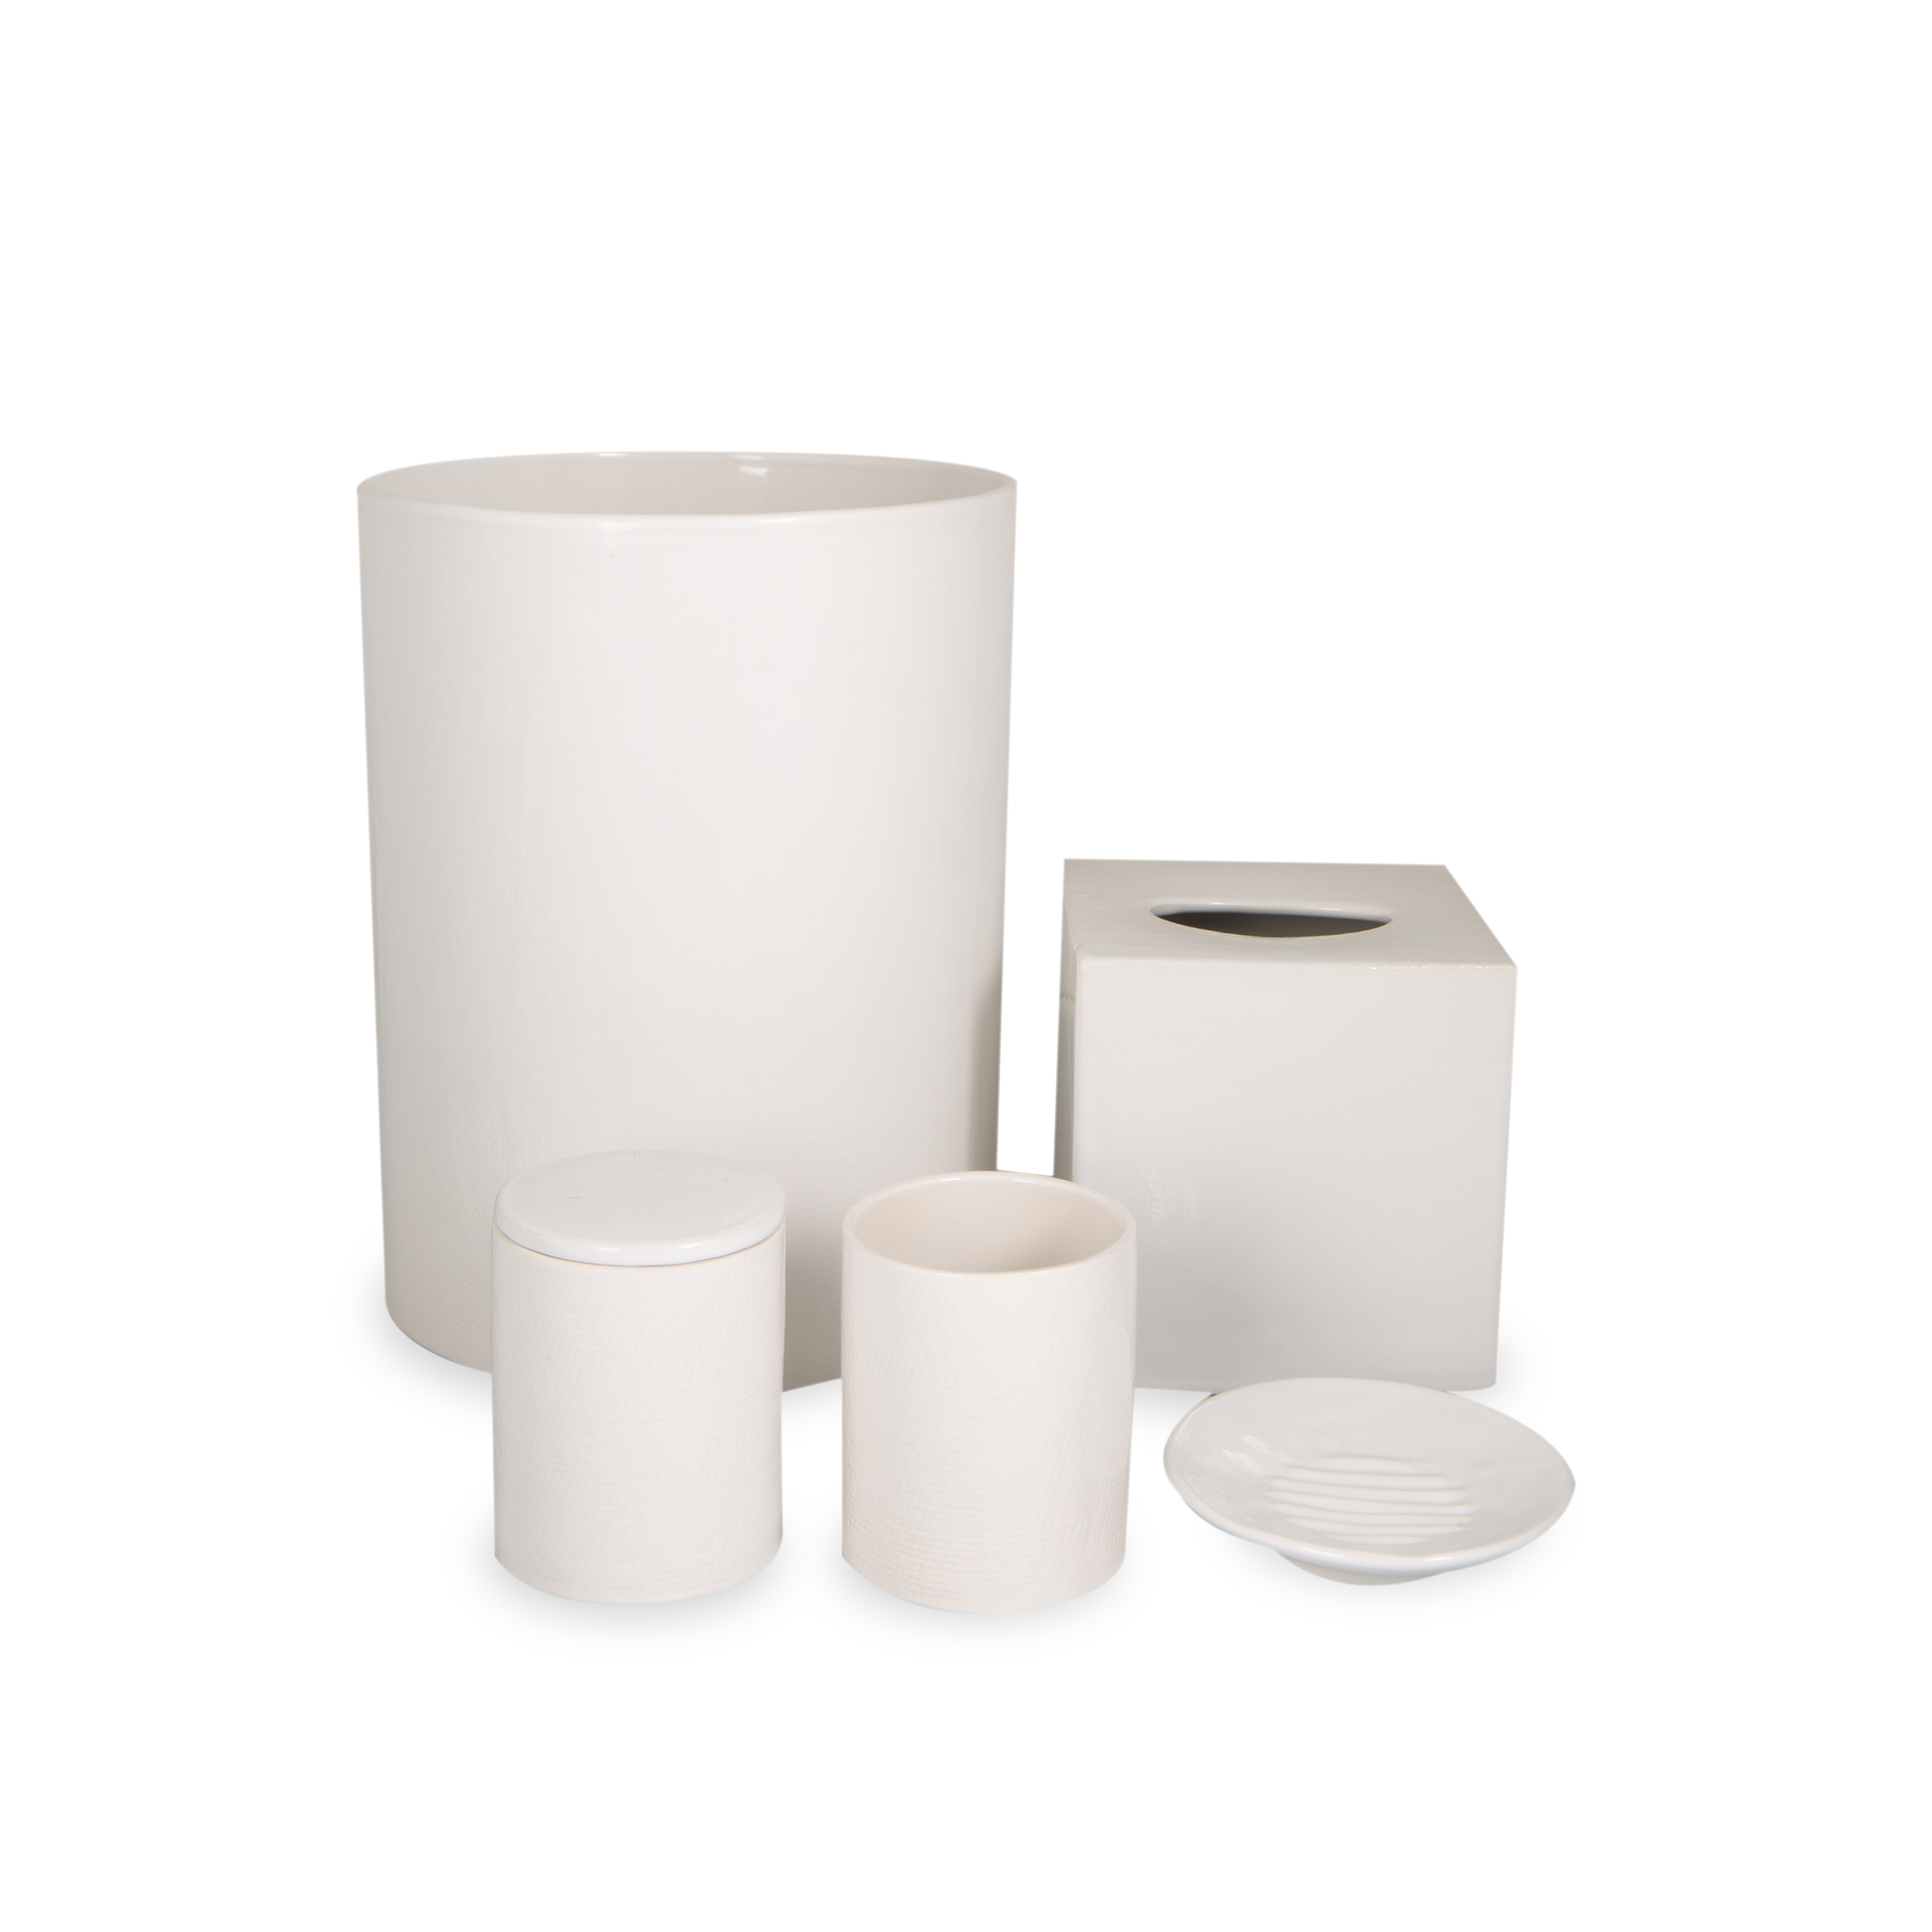 The Burlap Collection features a cylindrical shape made of ceramic with a burlap texture.